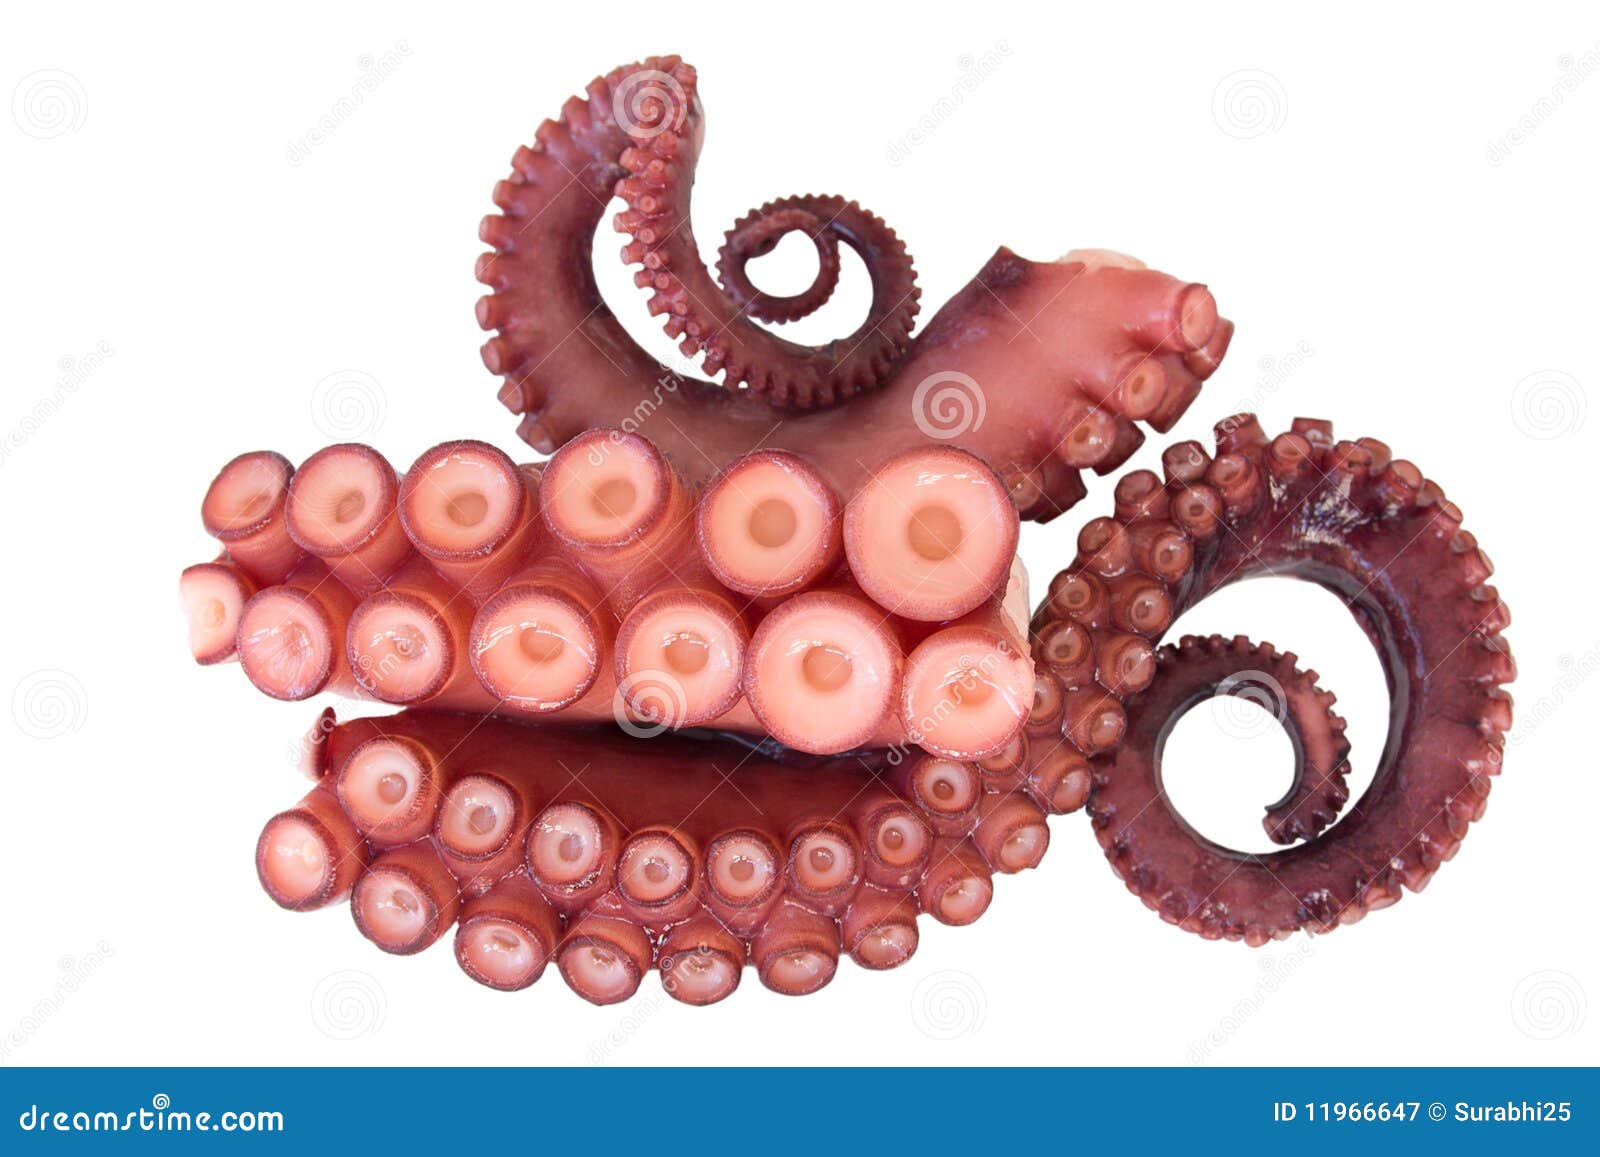 Tentacles Of Octopus Royalty Free Stock Photography - Image: 11966647